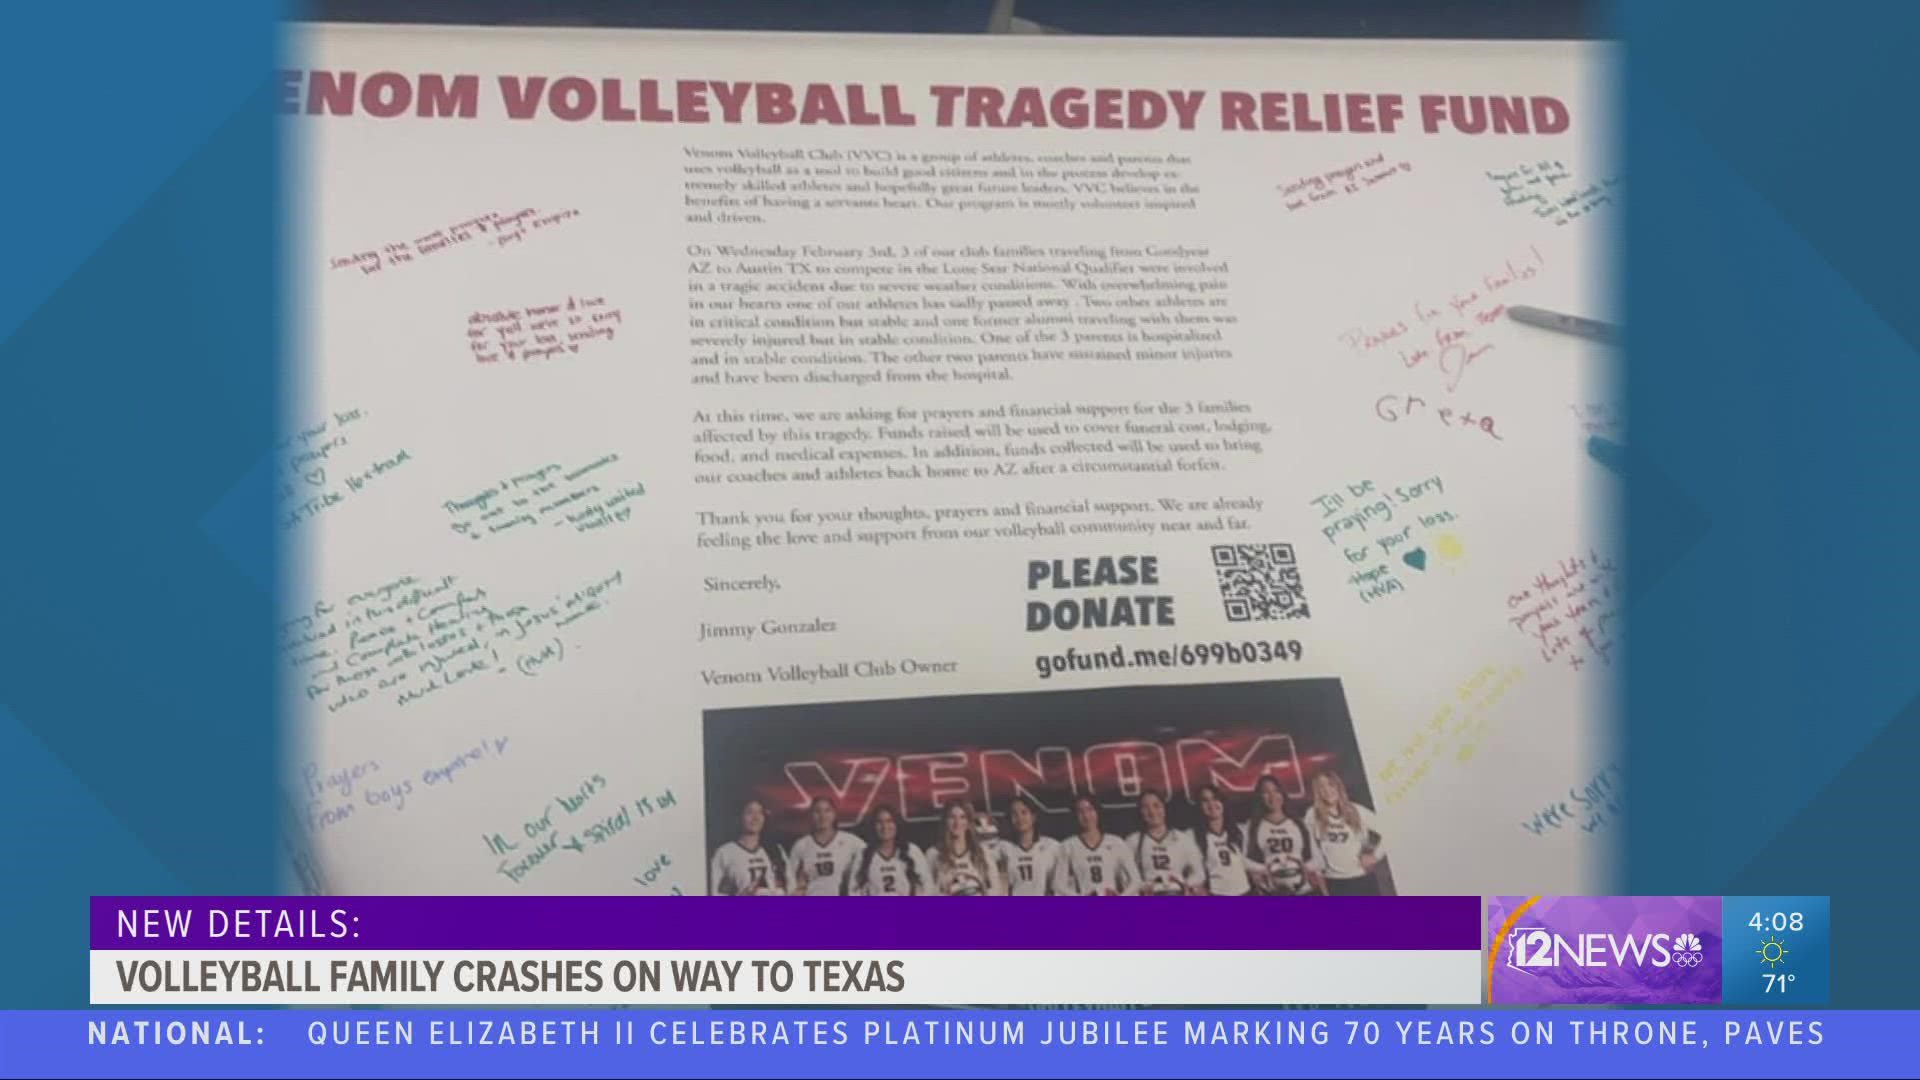 A member of a girls’ volleyball club team in the Valley died while she and her teammates were traveling to Texas for a tournament.